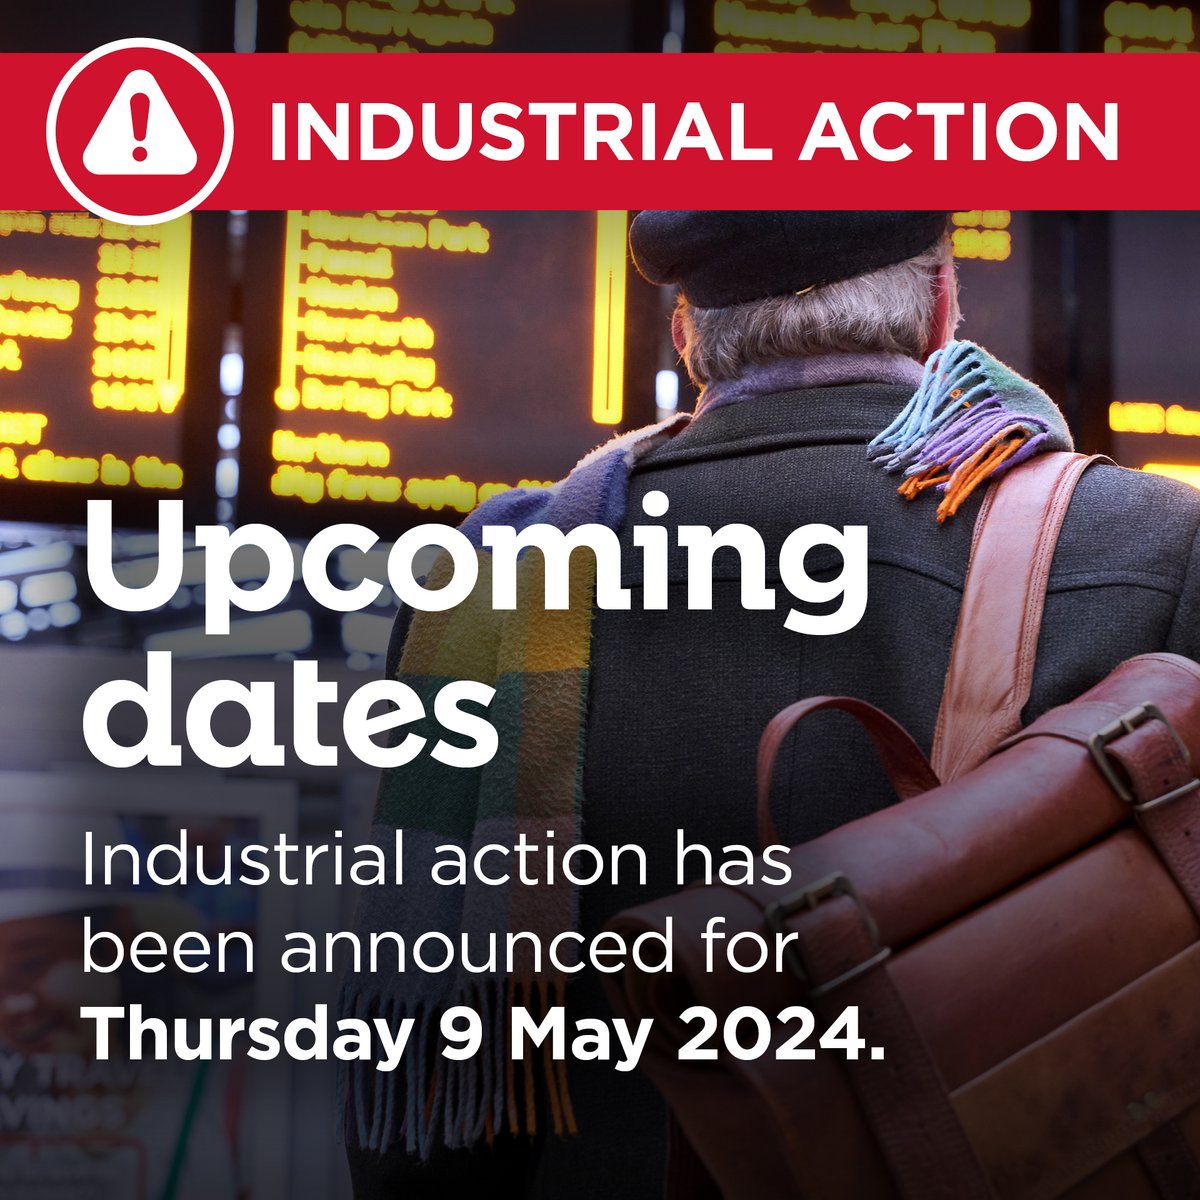 Industrial action has been announced on Thurs 9 May for LNER as part of multiple strikes by members of drivers' union ASLEF. LNER trains for Thurs 9 May have been taken off-sale while we work out how this action affects our timetable. For latest updates: spkl.io/60104Lssa